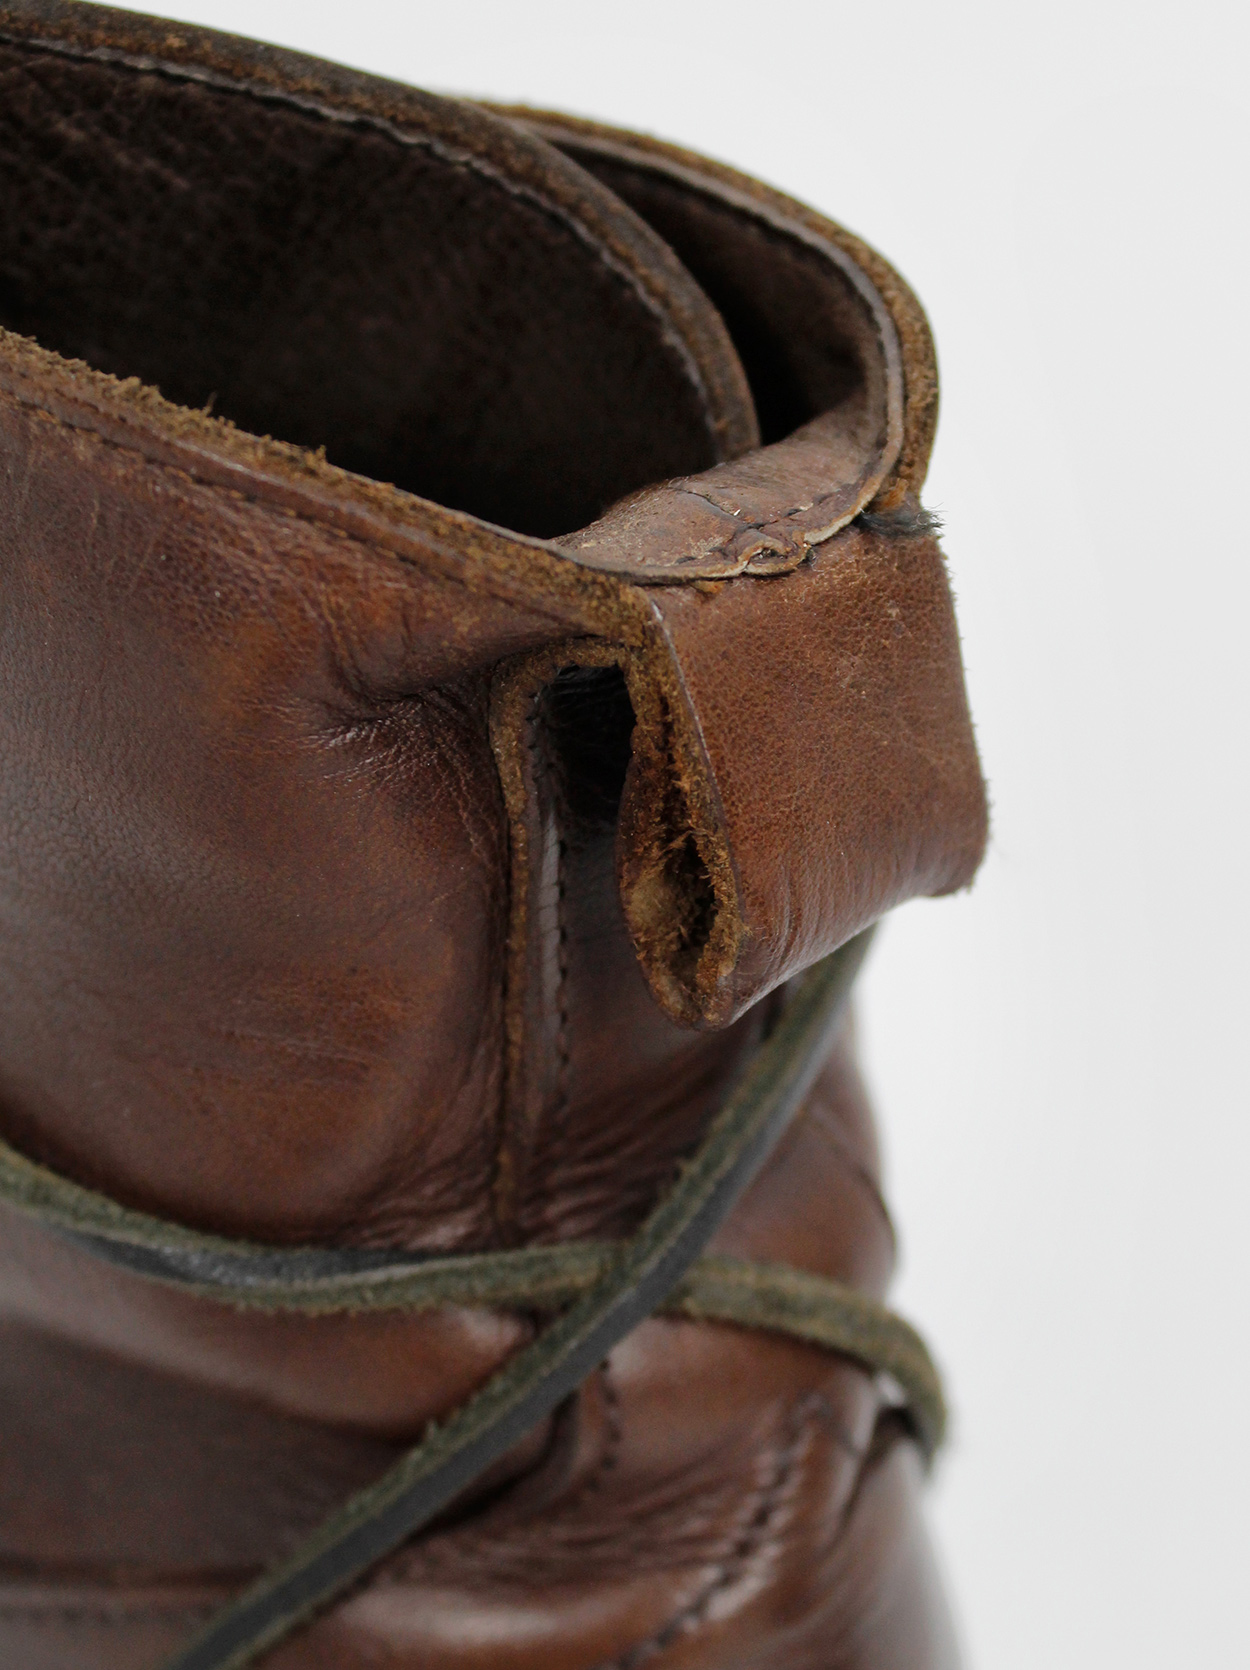 Dirk Bikkembergs brown combat boots wrapped by laces through the soles ...